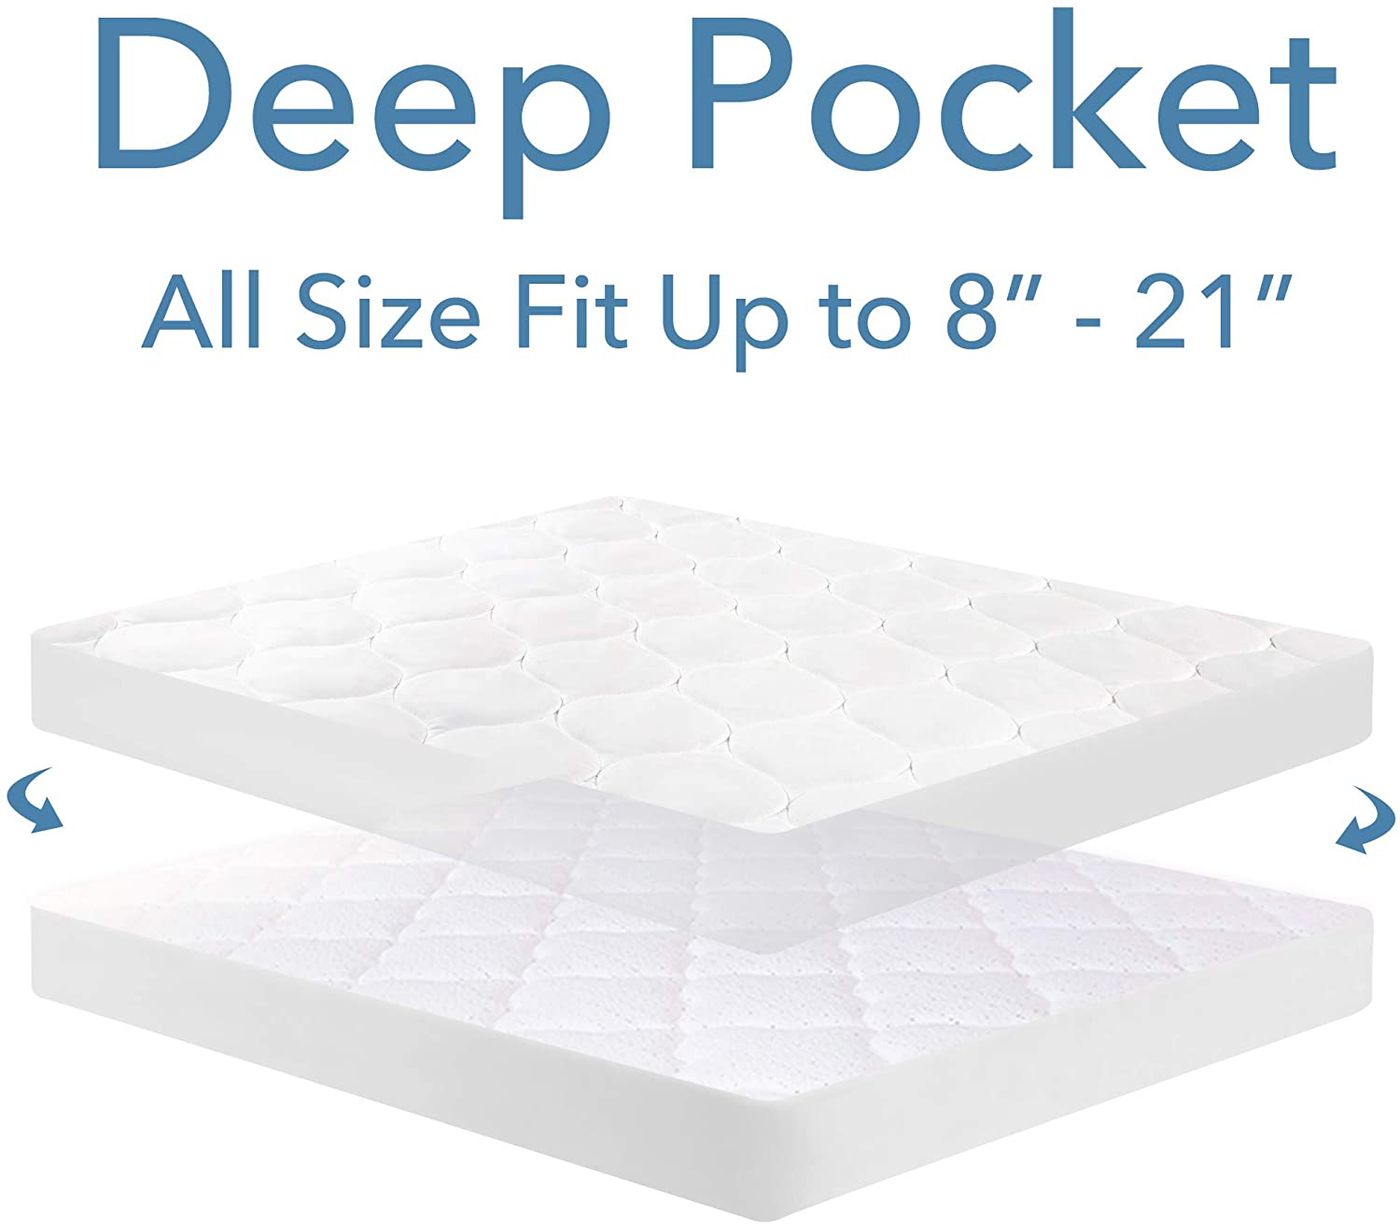 LANOITE Full Waterproof Mattress Protector Pad Cover with Deep Pocket Fitted 8" - 21" Breathable Alternative Filling (White, Full)